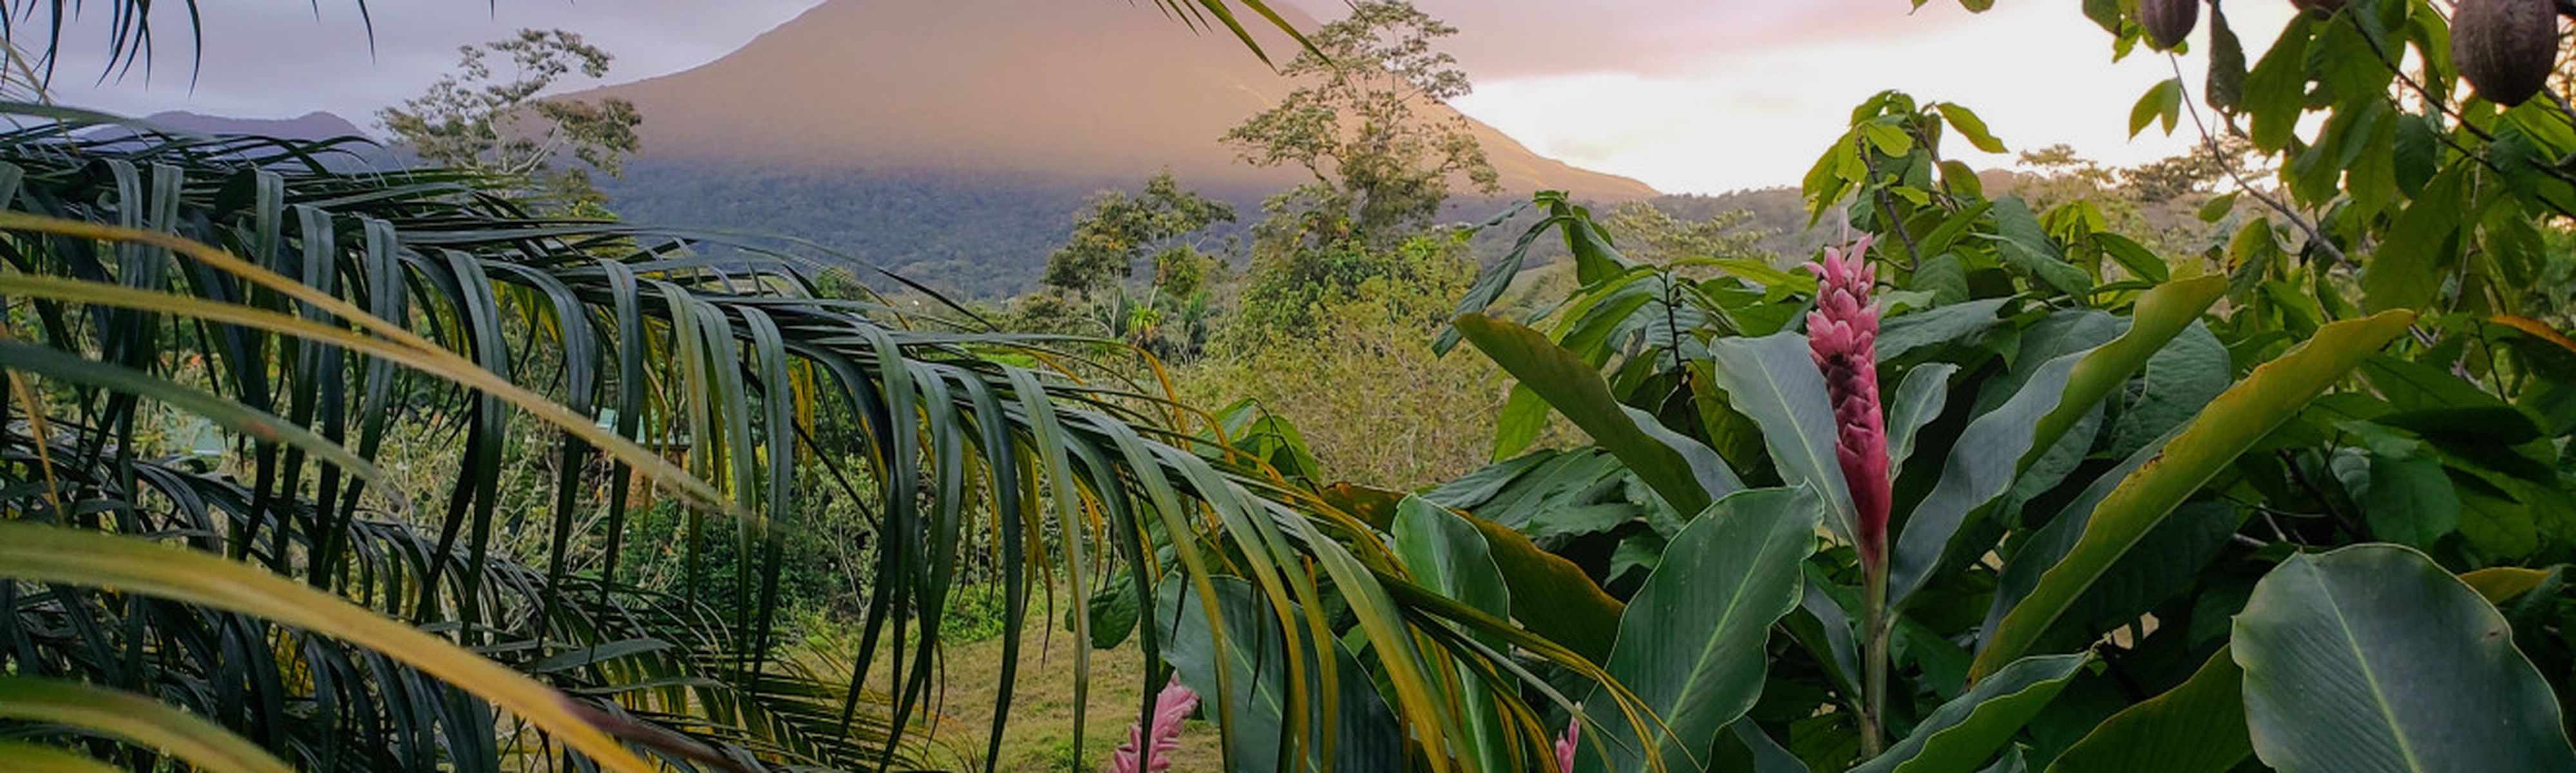 palm trees and flowers with view of arenal volcano covered in clouds